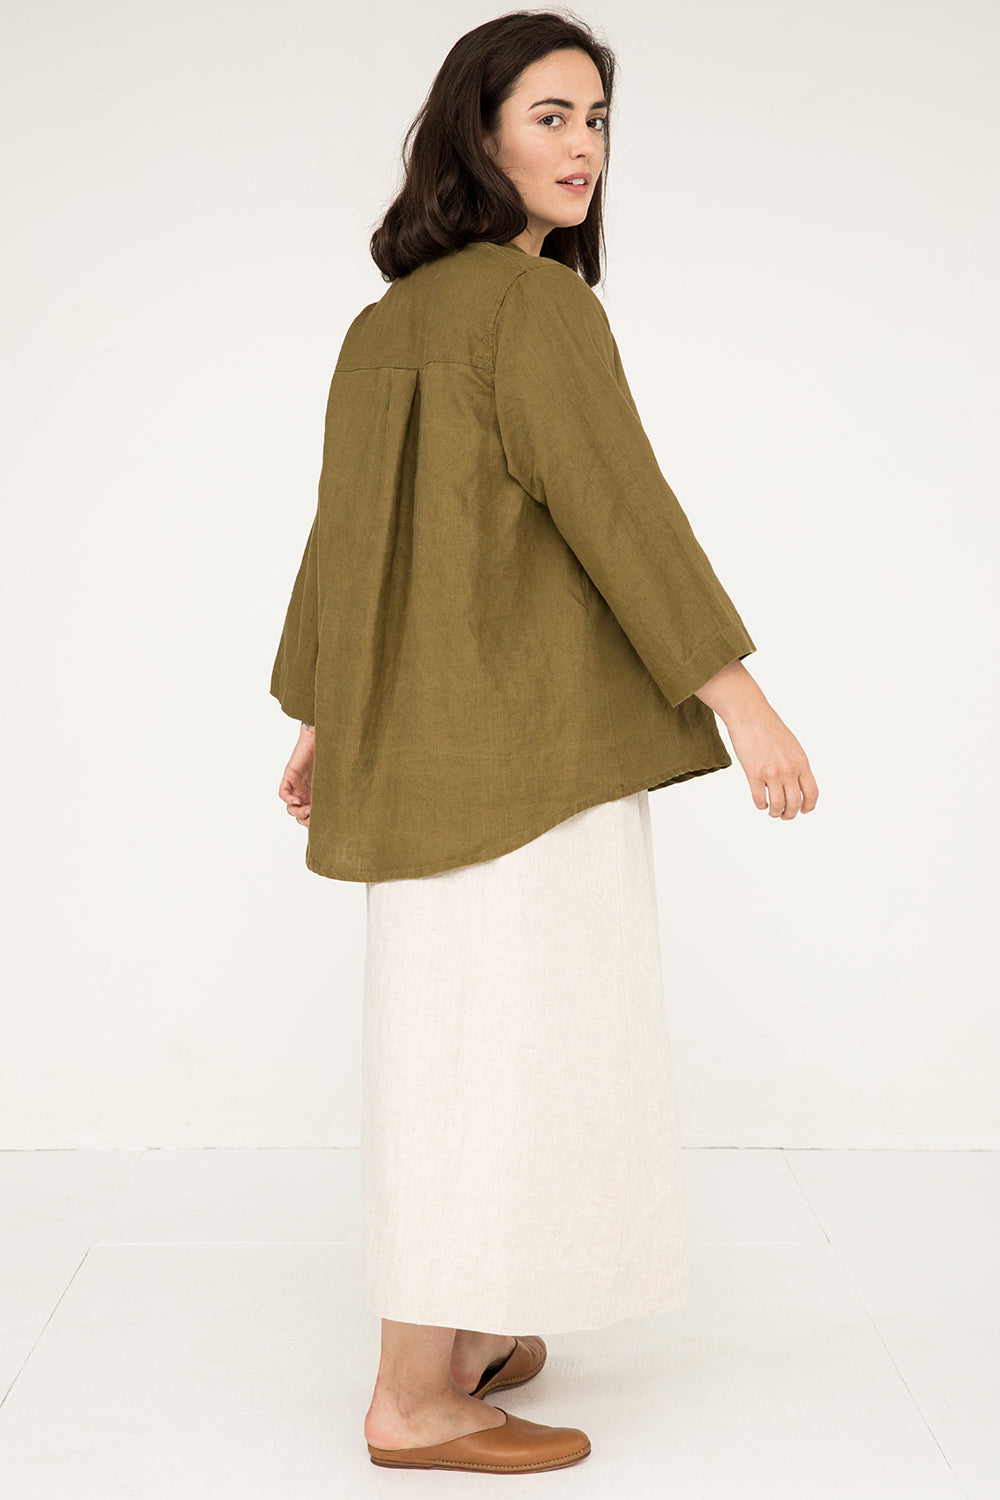 Long Sleeve Kara Snap Top in Midweight Linen Olive#color_olive